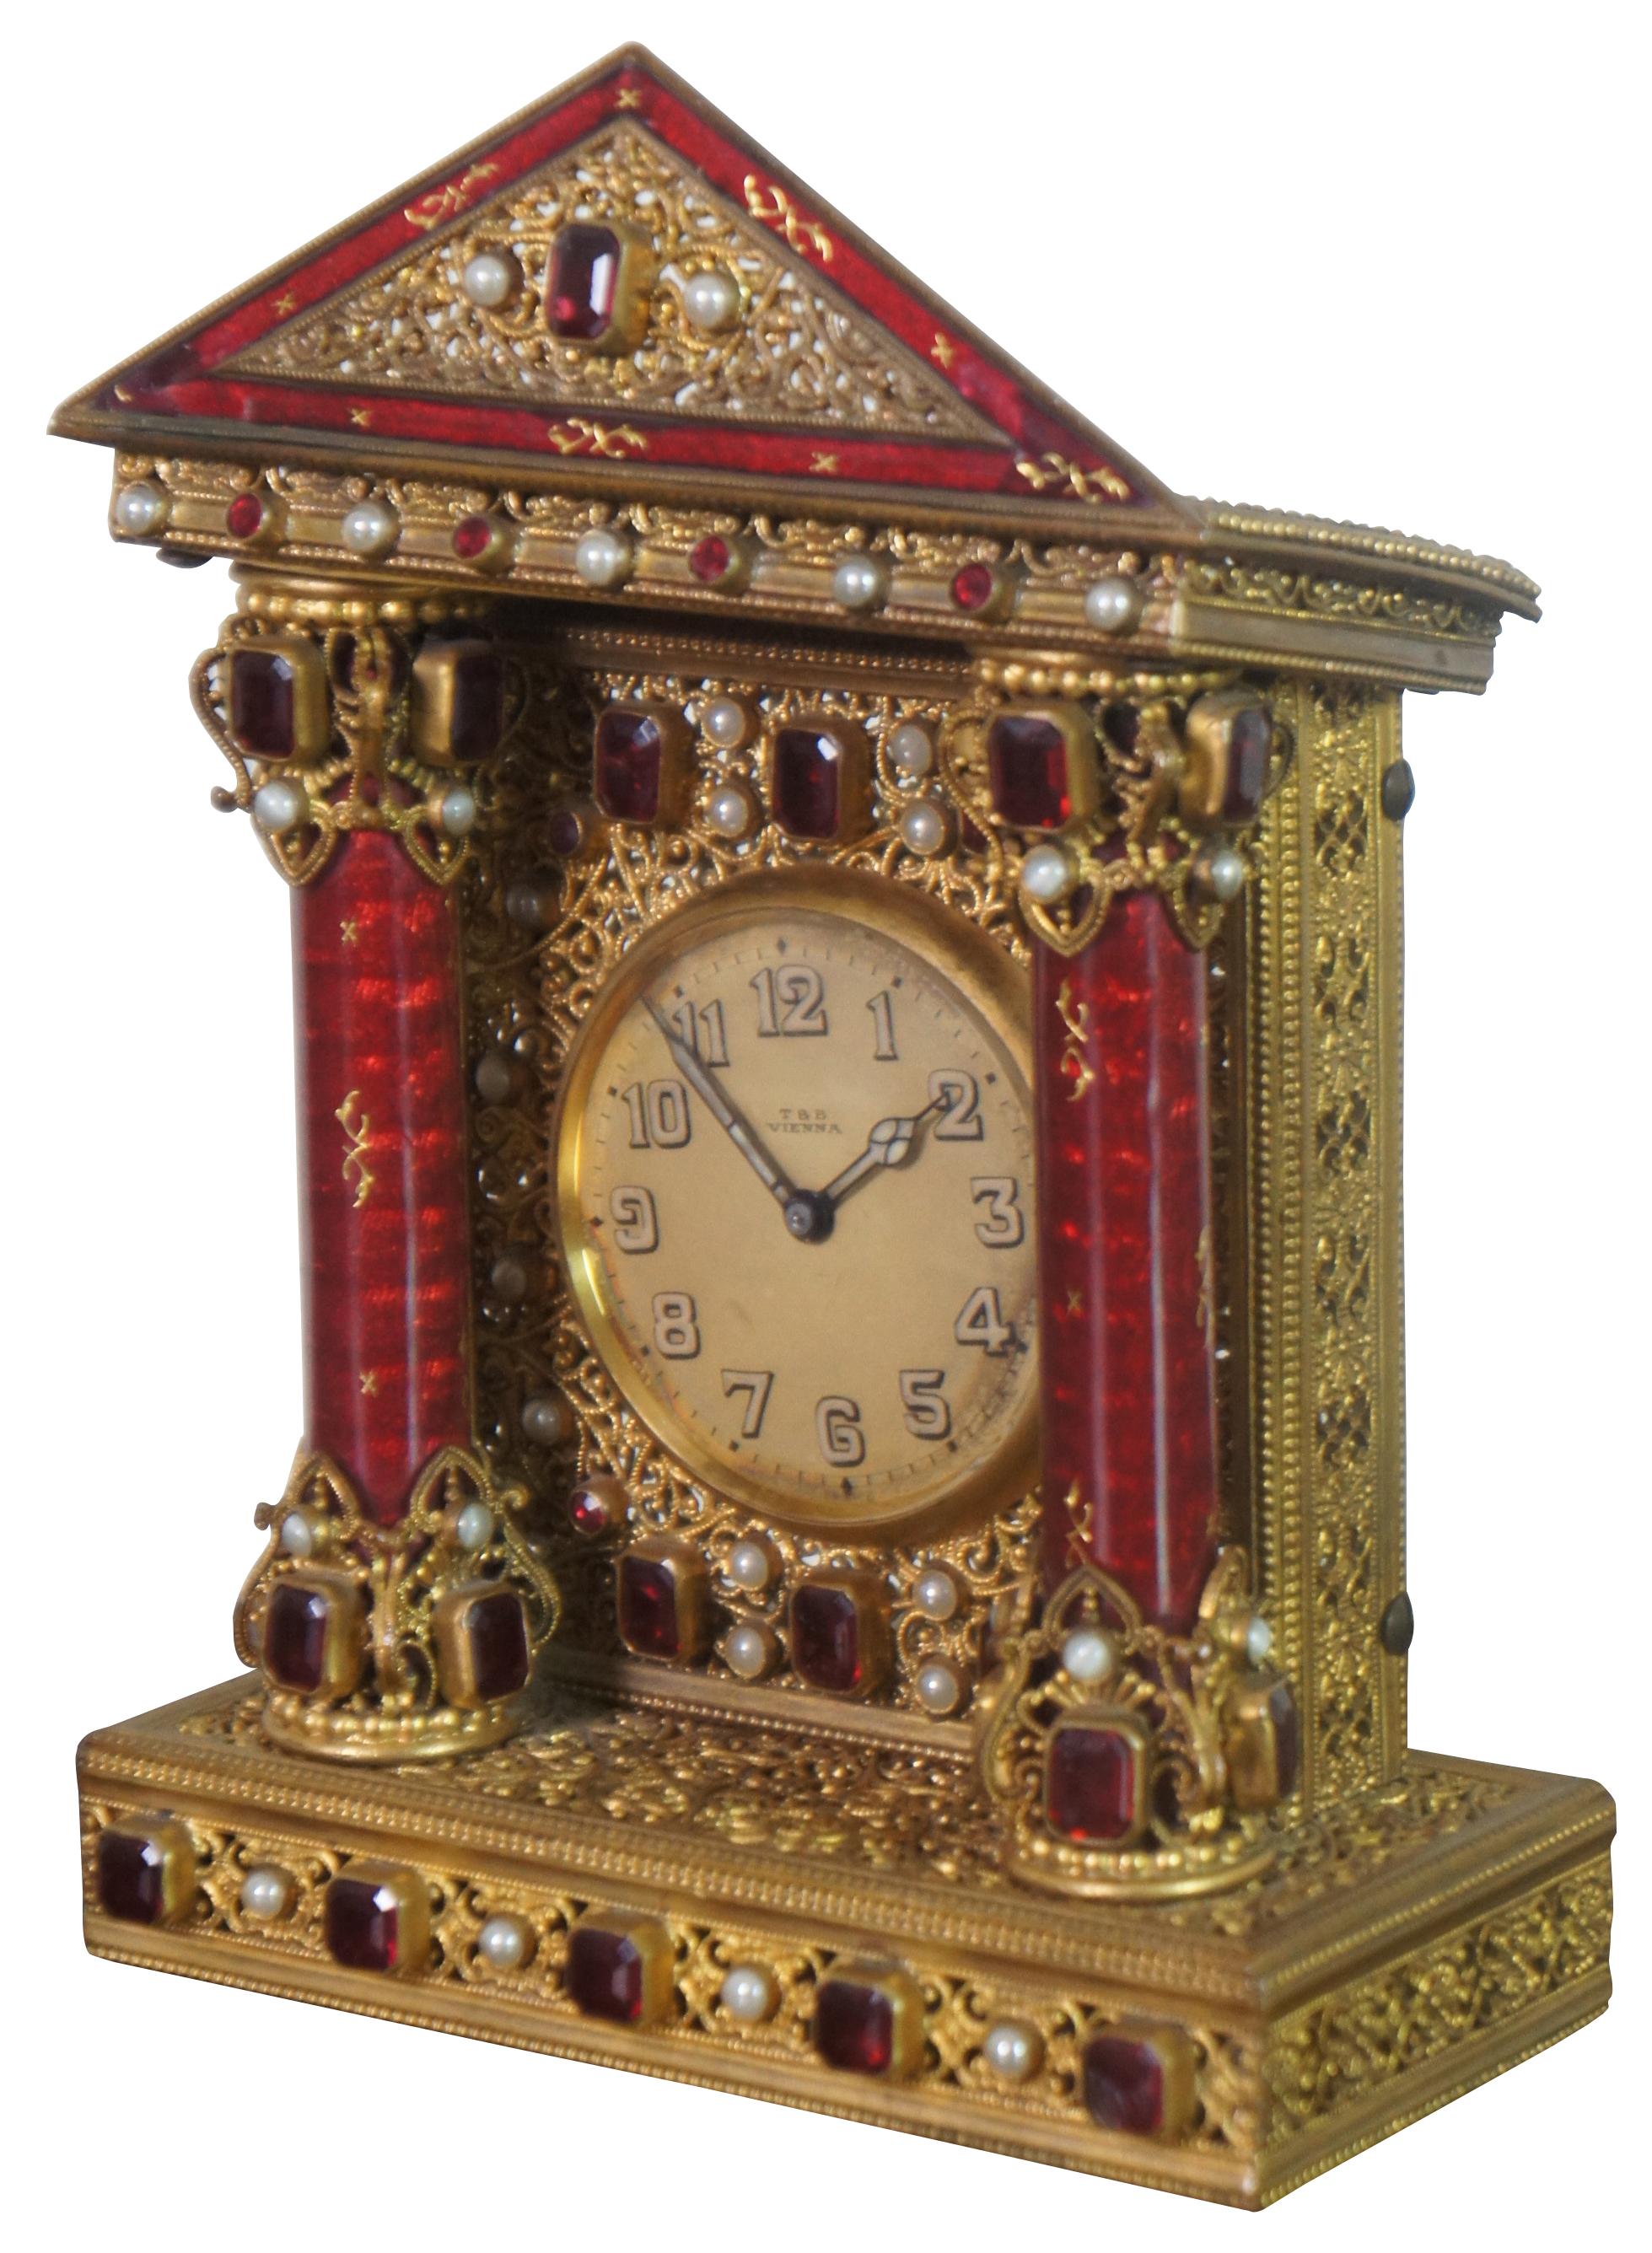 Early 20th century French table clock styled as a neoclassical building crafted of gilded filigree studded with gemstones and pearls, featuring two columns of semi-translucent red enamel columns supporting a triangular pediment. Dial marked T&B